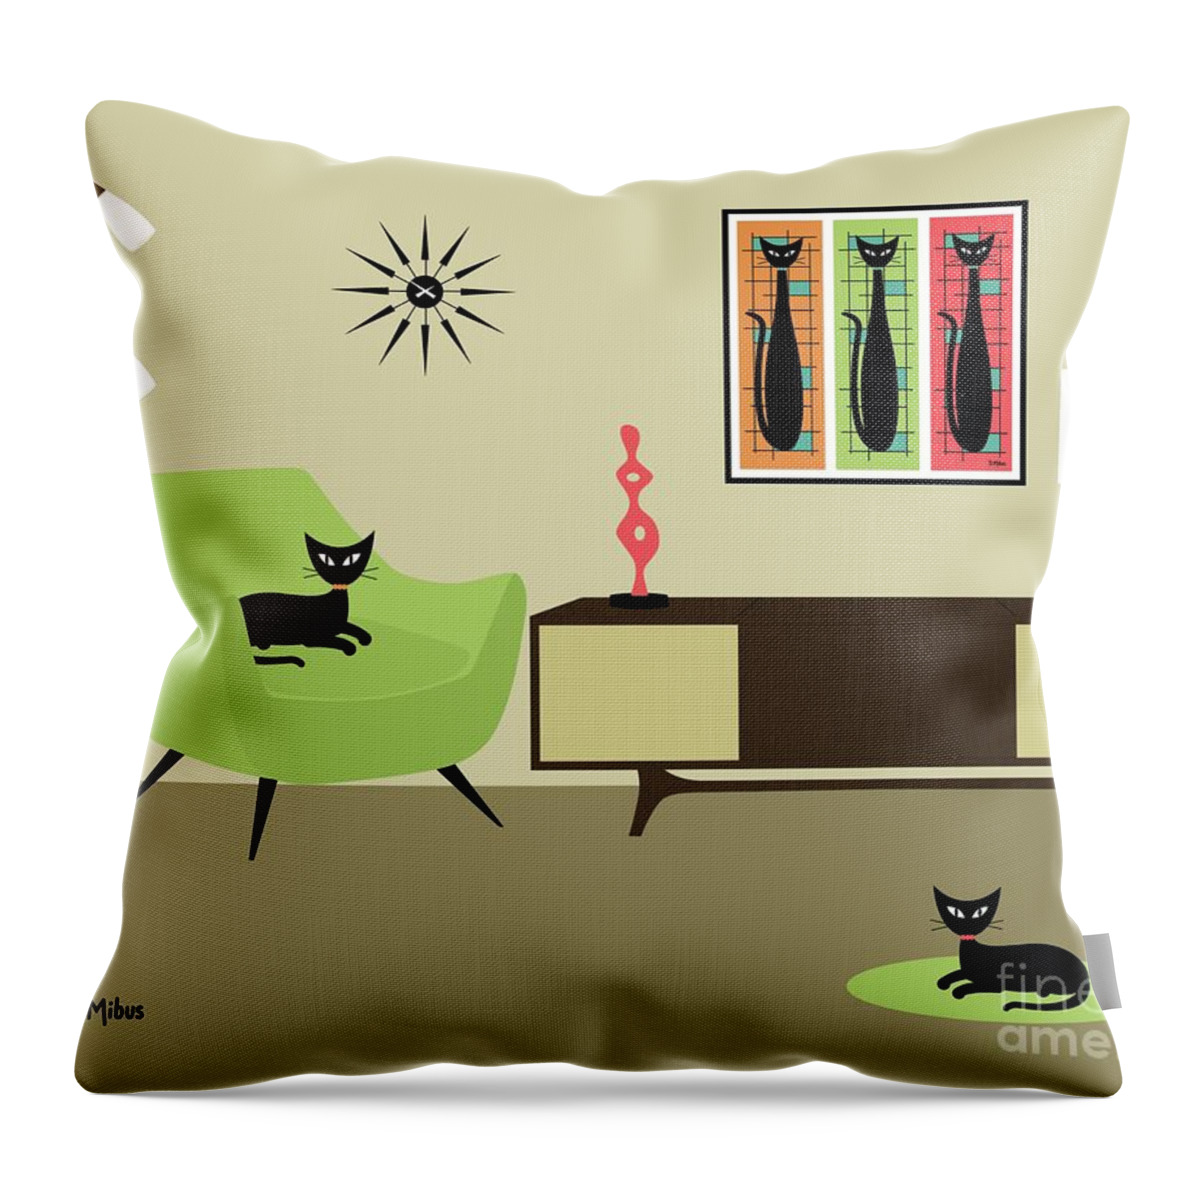 Mondrian Throw Pillow featuring the digital art Mondrian Style Black Cats by Donna Mibus